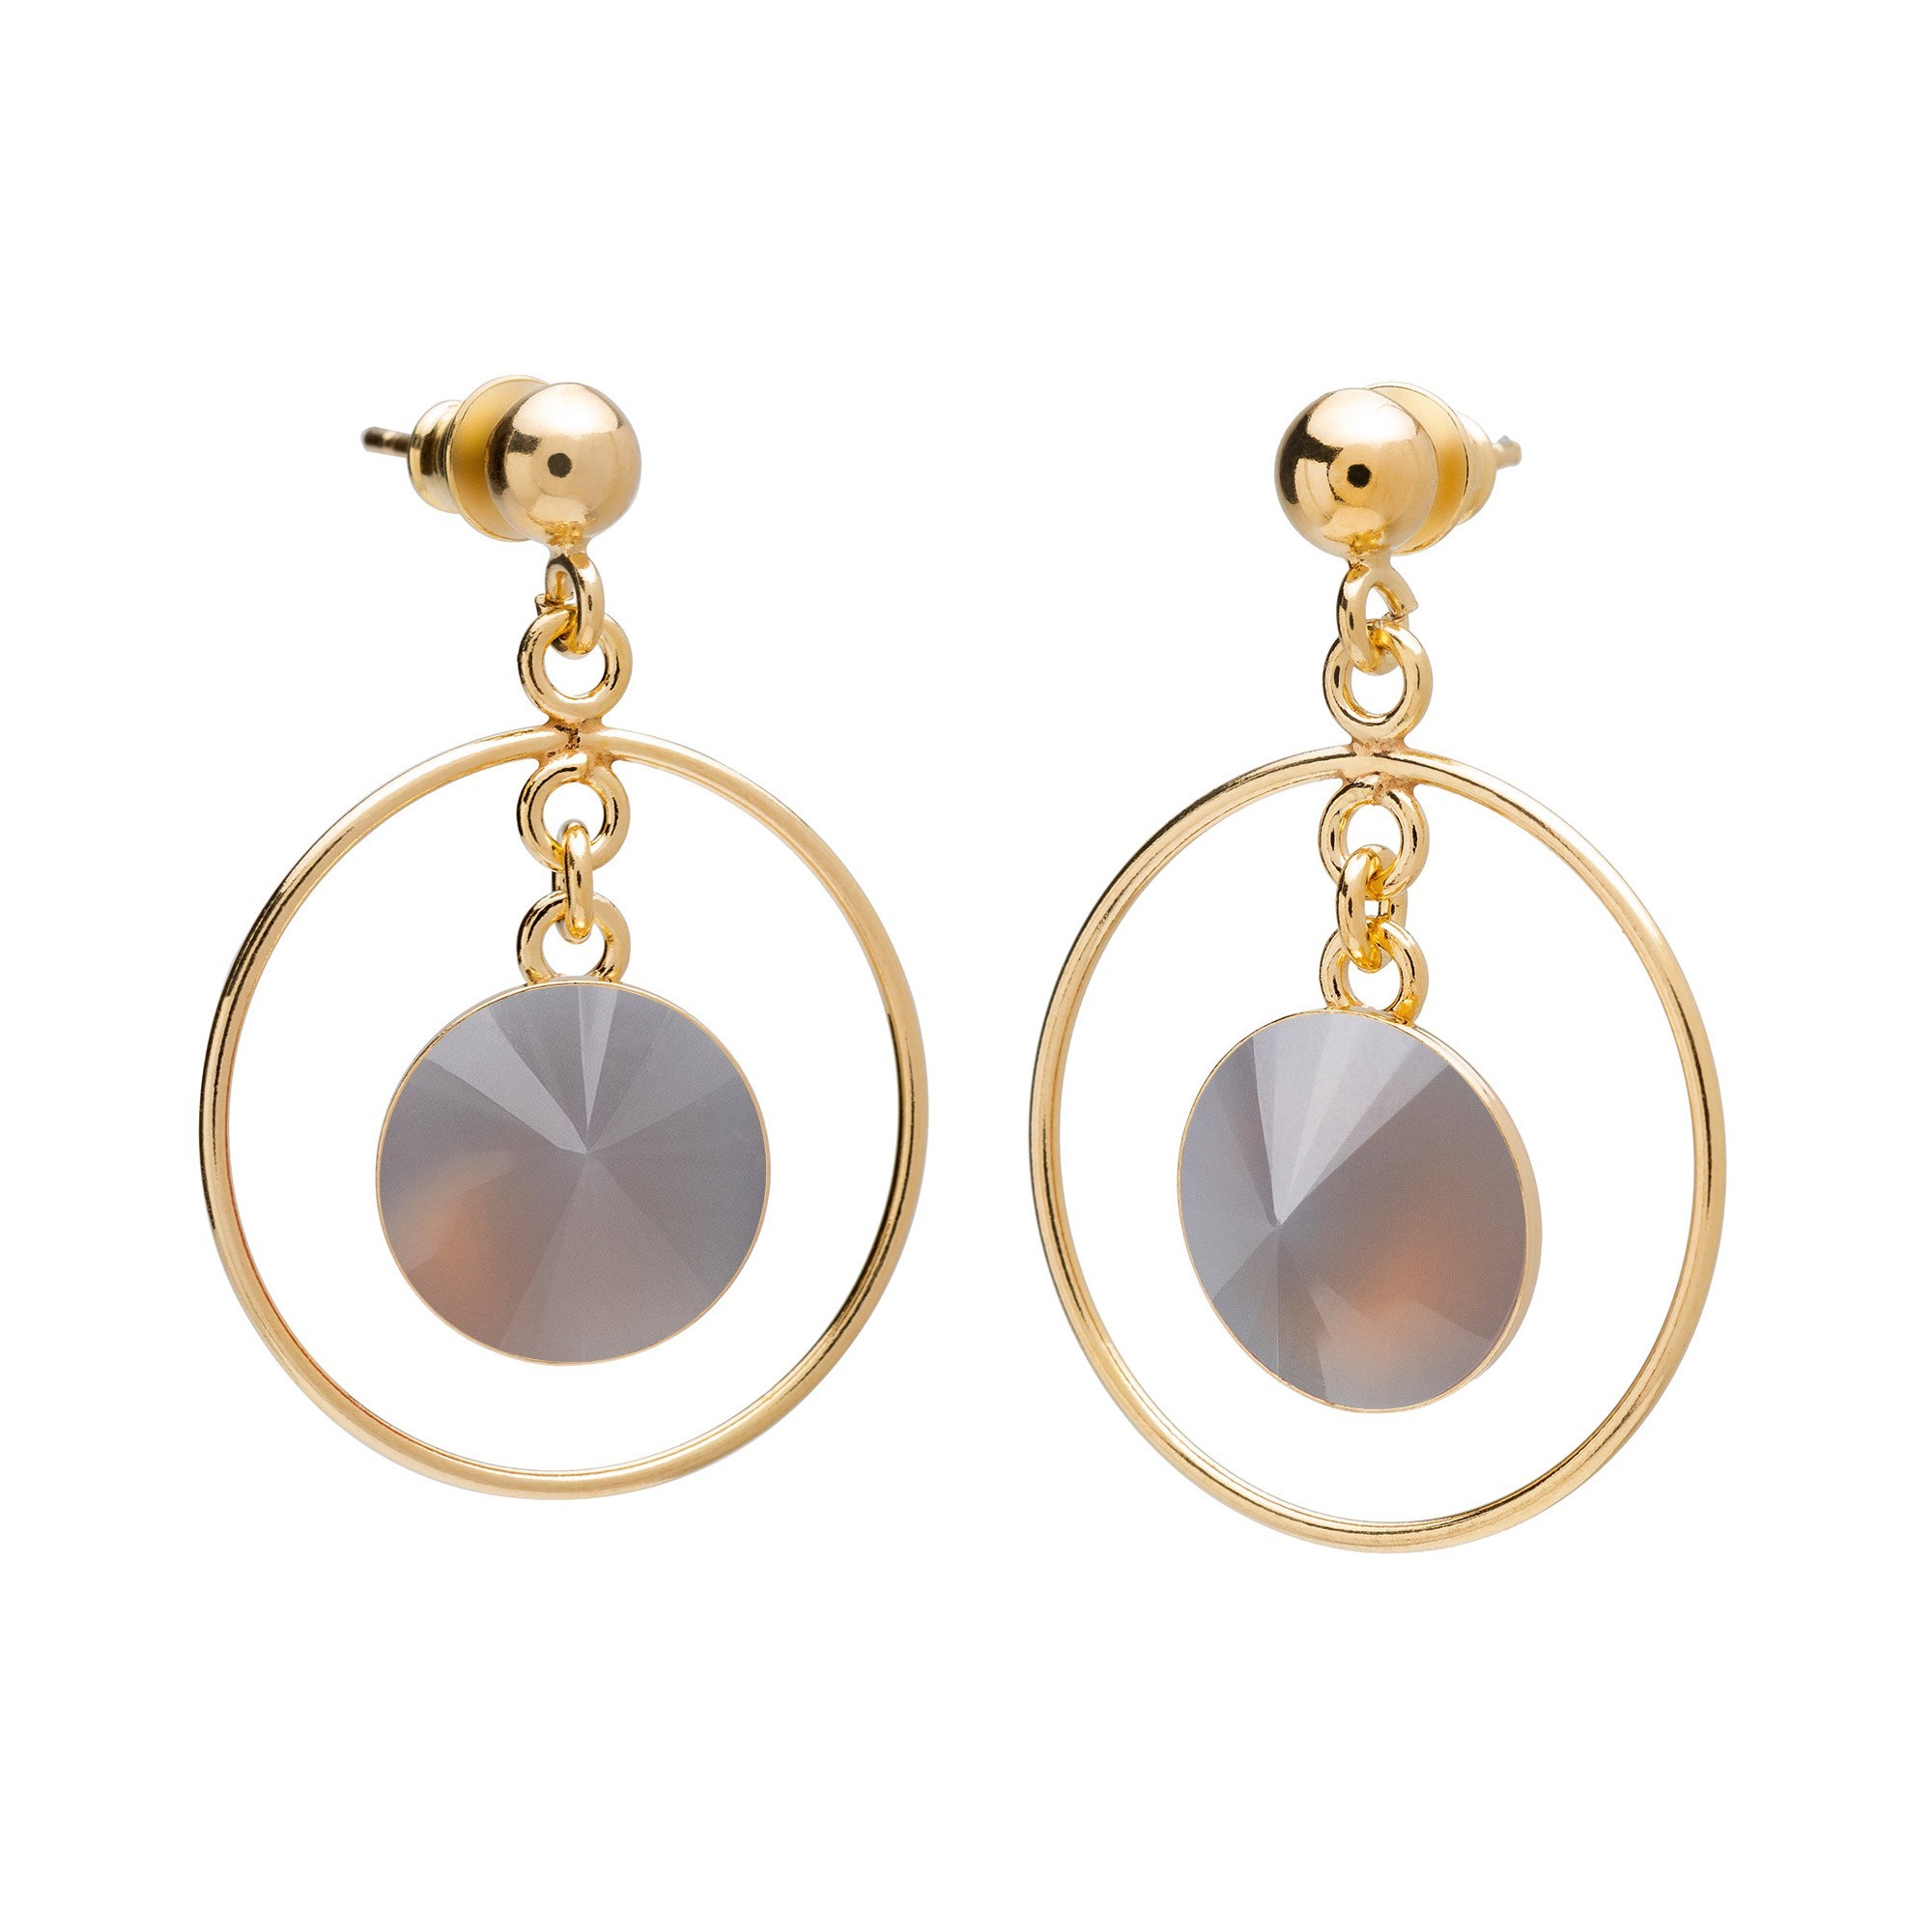 Round earrings with natural stone, 925